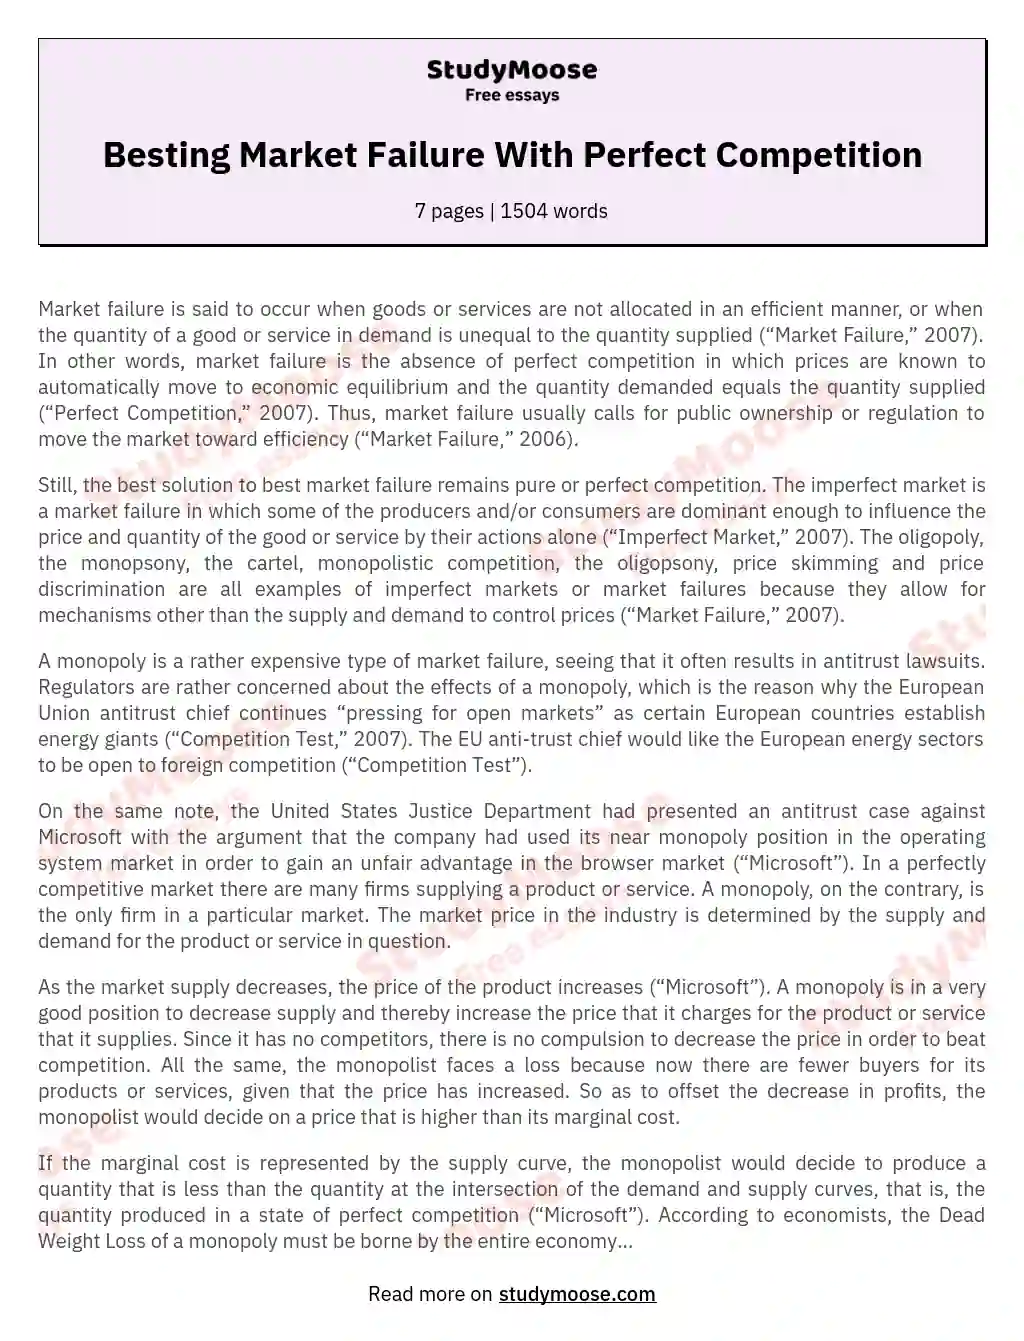 Besting Market Failure With Perfect Competition essay